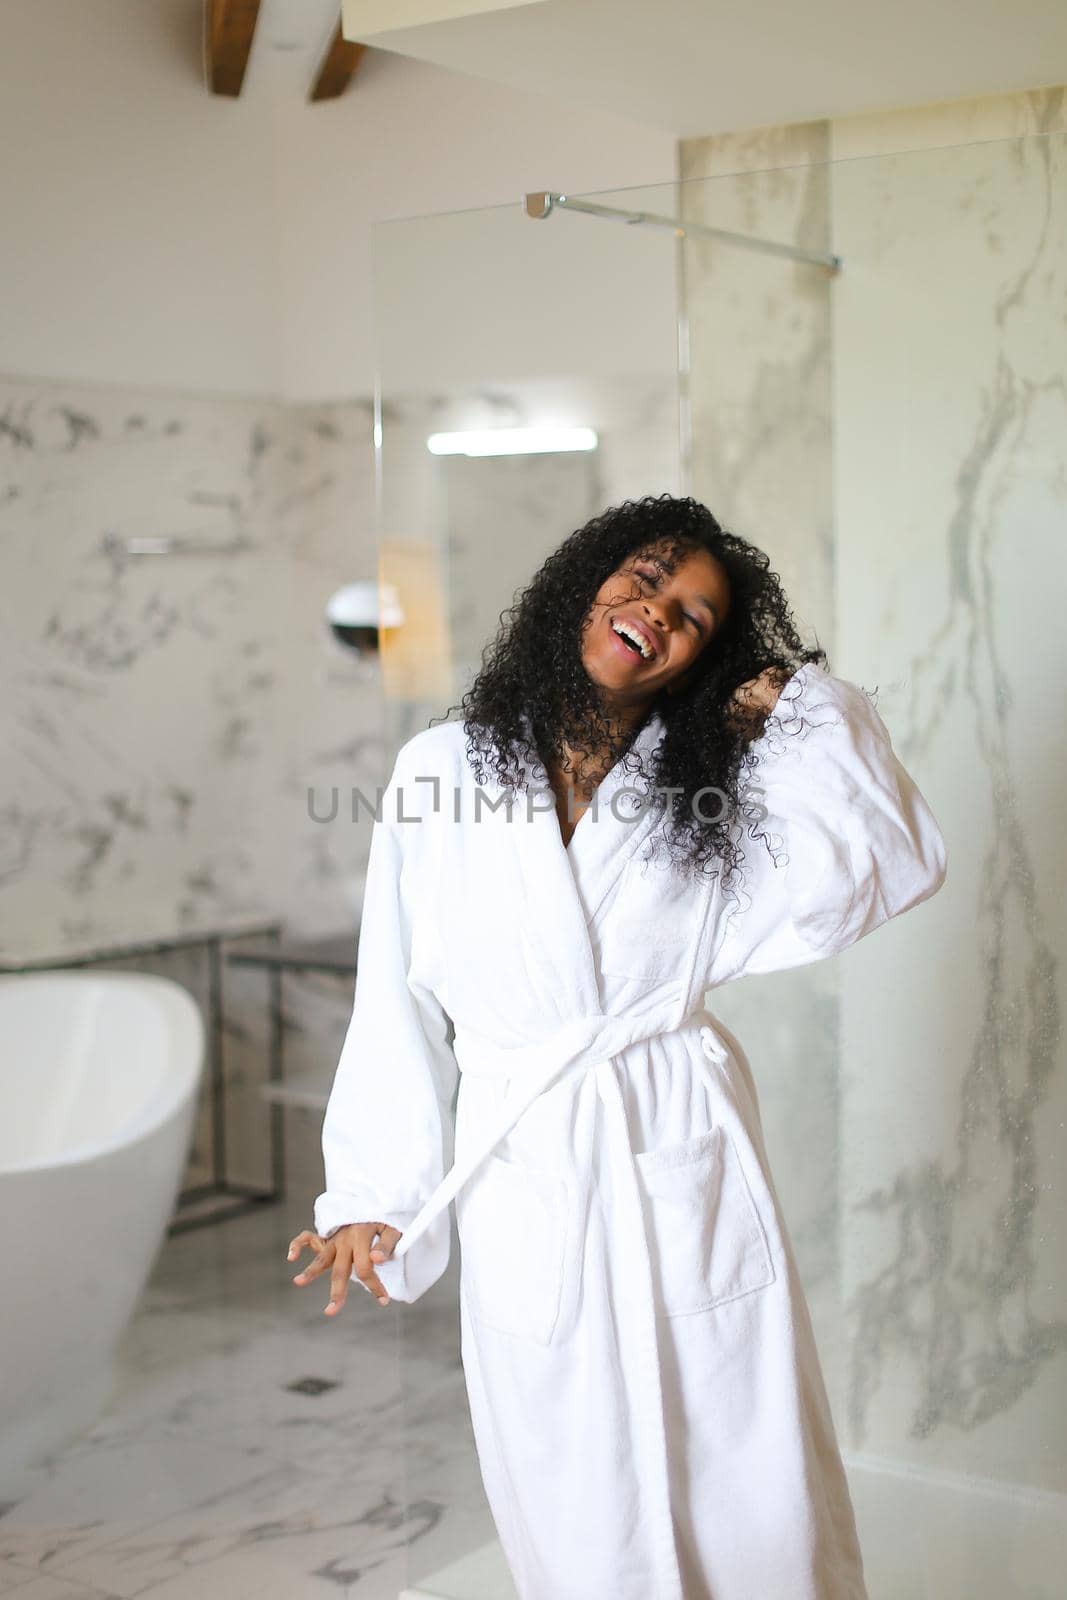 Young black girl wearing white bathrobe and standing in hotel bathroom with marble walls. Concept of relax and morning hygiene.